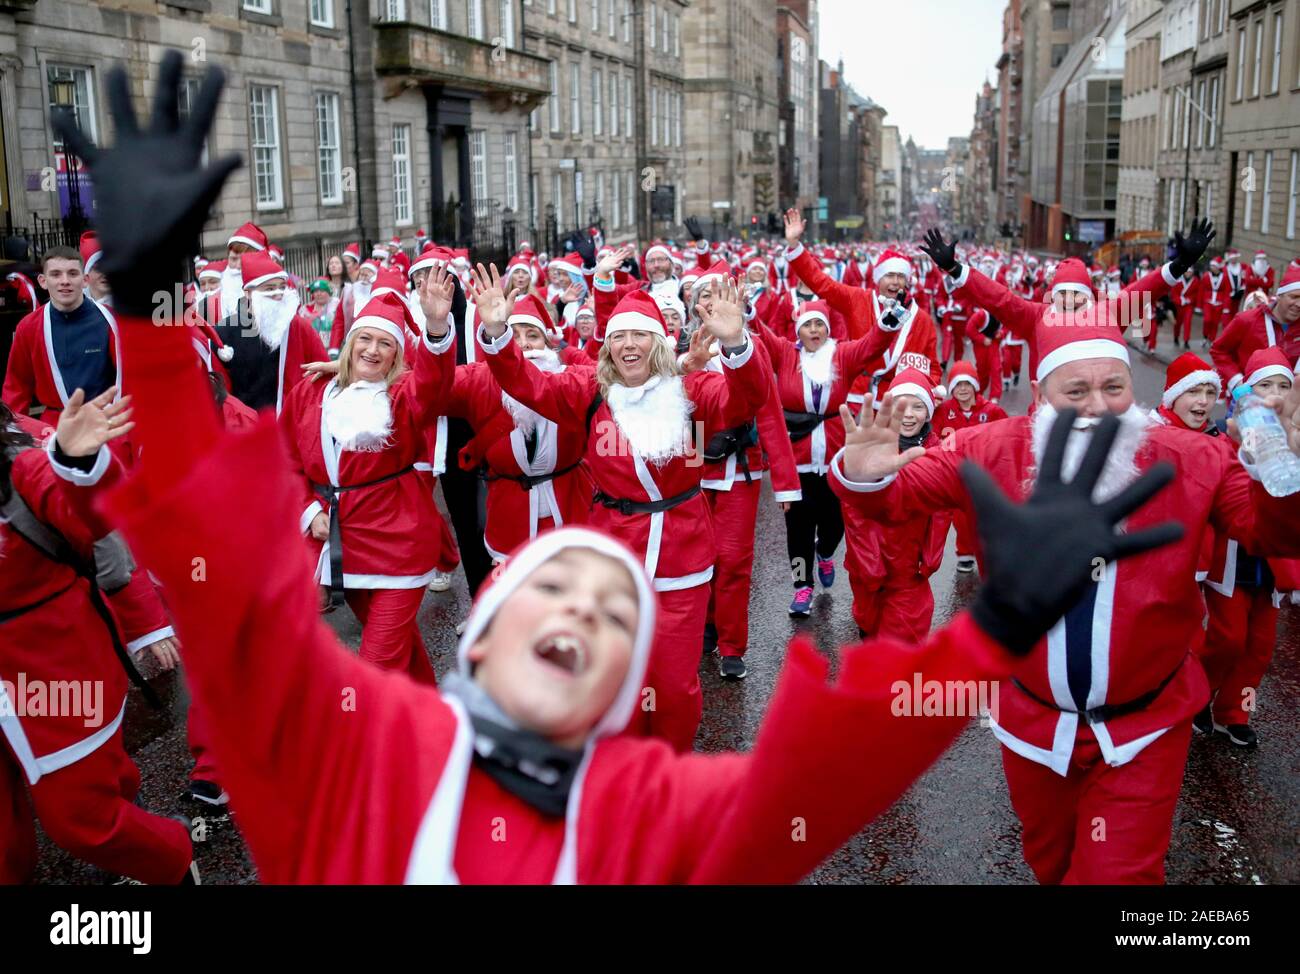 Over seven thousand members of the public taking part in Glasgow's annual Christmas Santa dash through the city centre. The Santa Dash has been held since 2006 and over the years has raised hundreds of thousands of pounds for charities working in and around Glasgow. Stock Photo